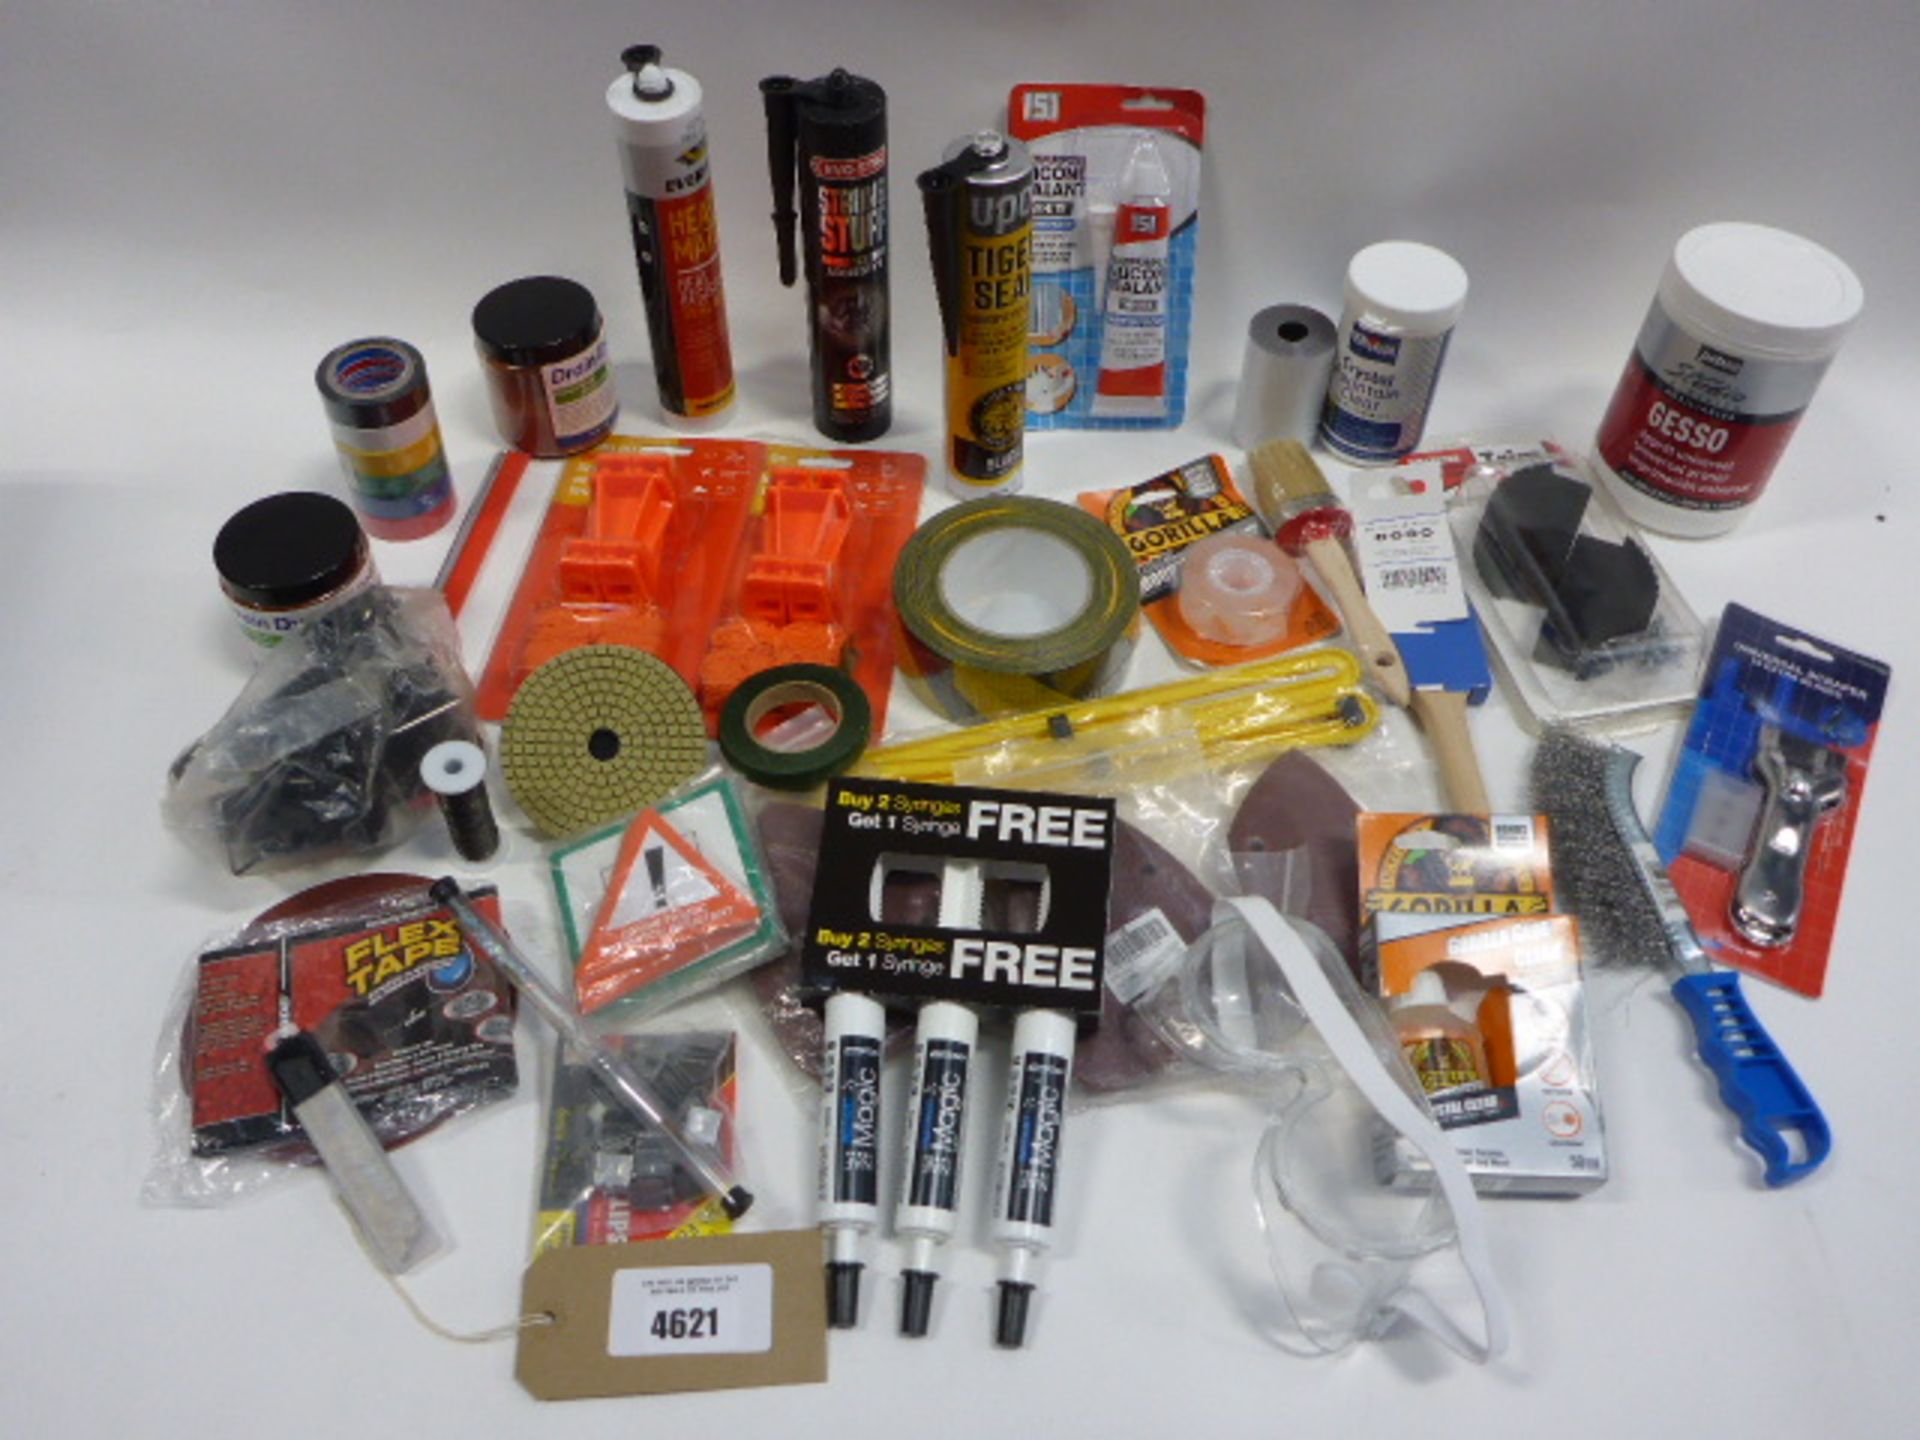 Bag containing string lines, tiger seal, evostick adhesive, silicone sealant, wire brushes, sand